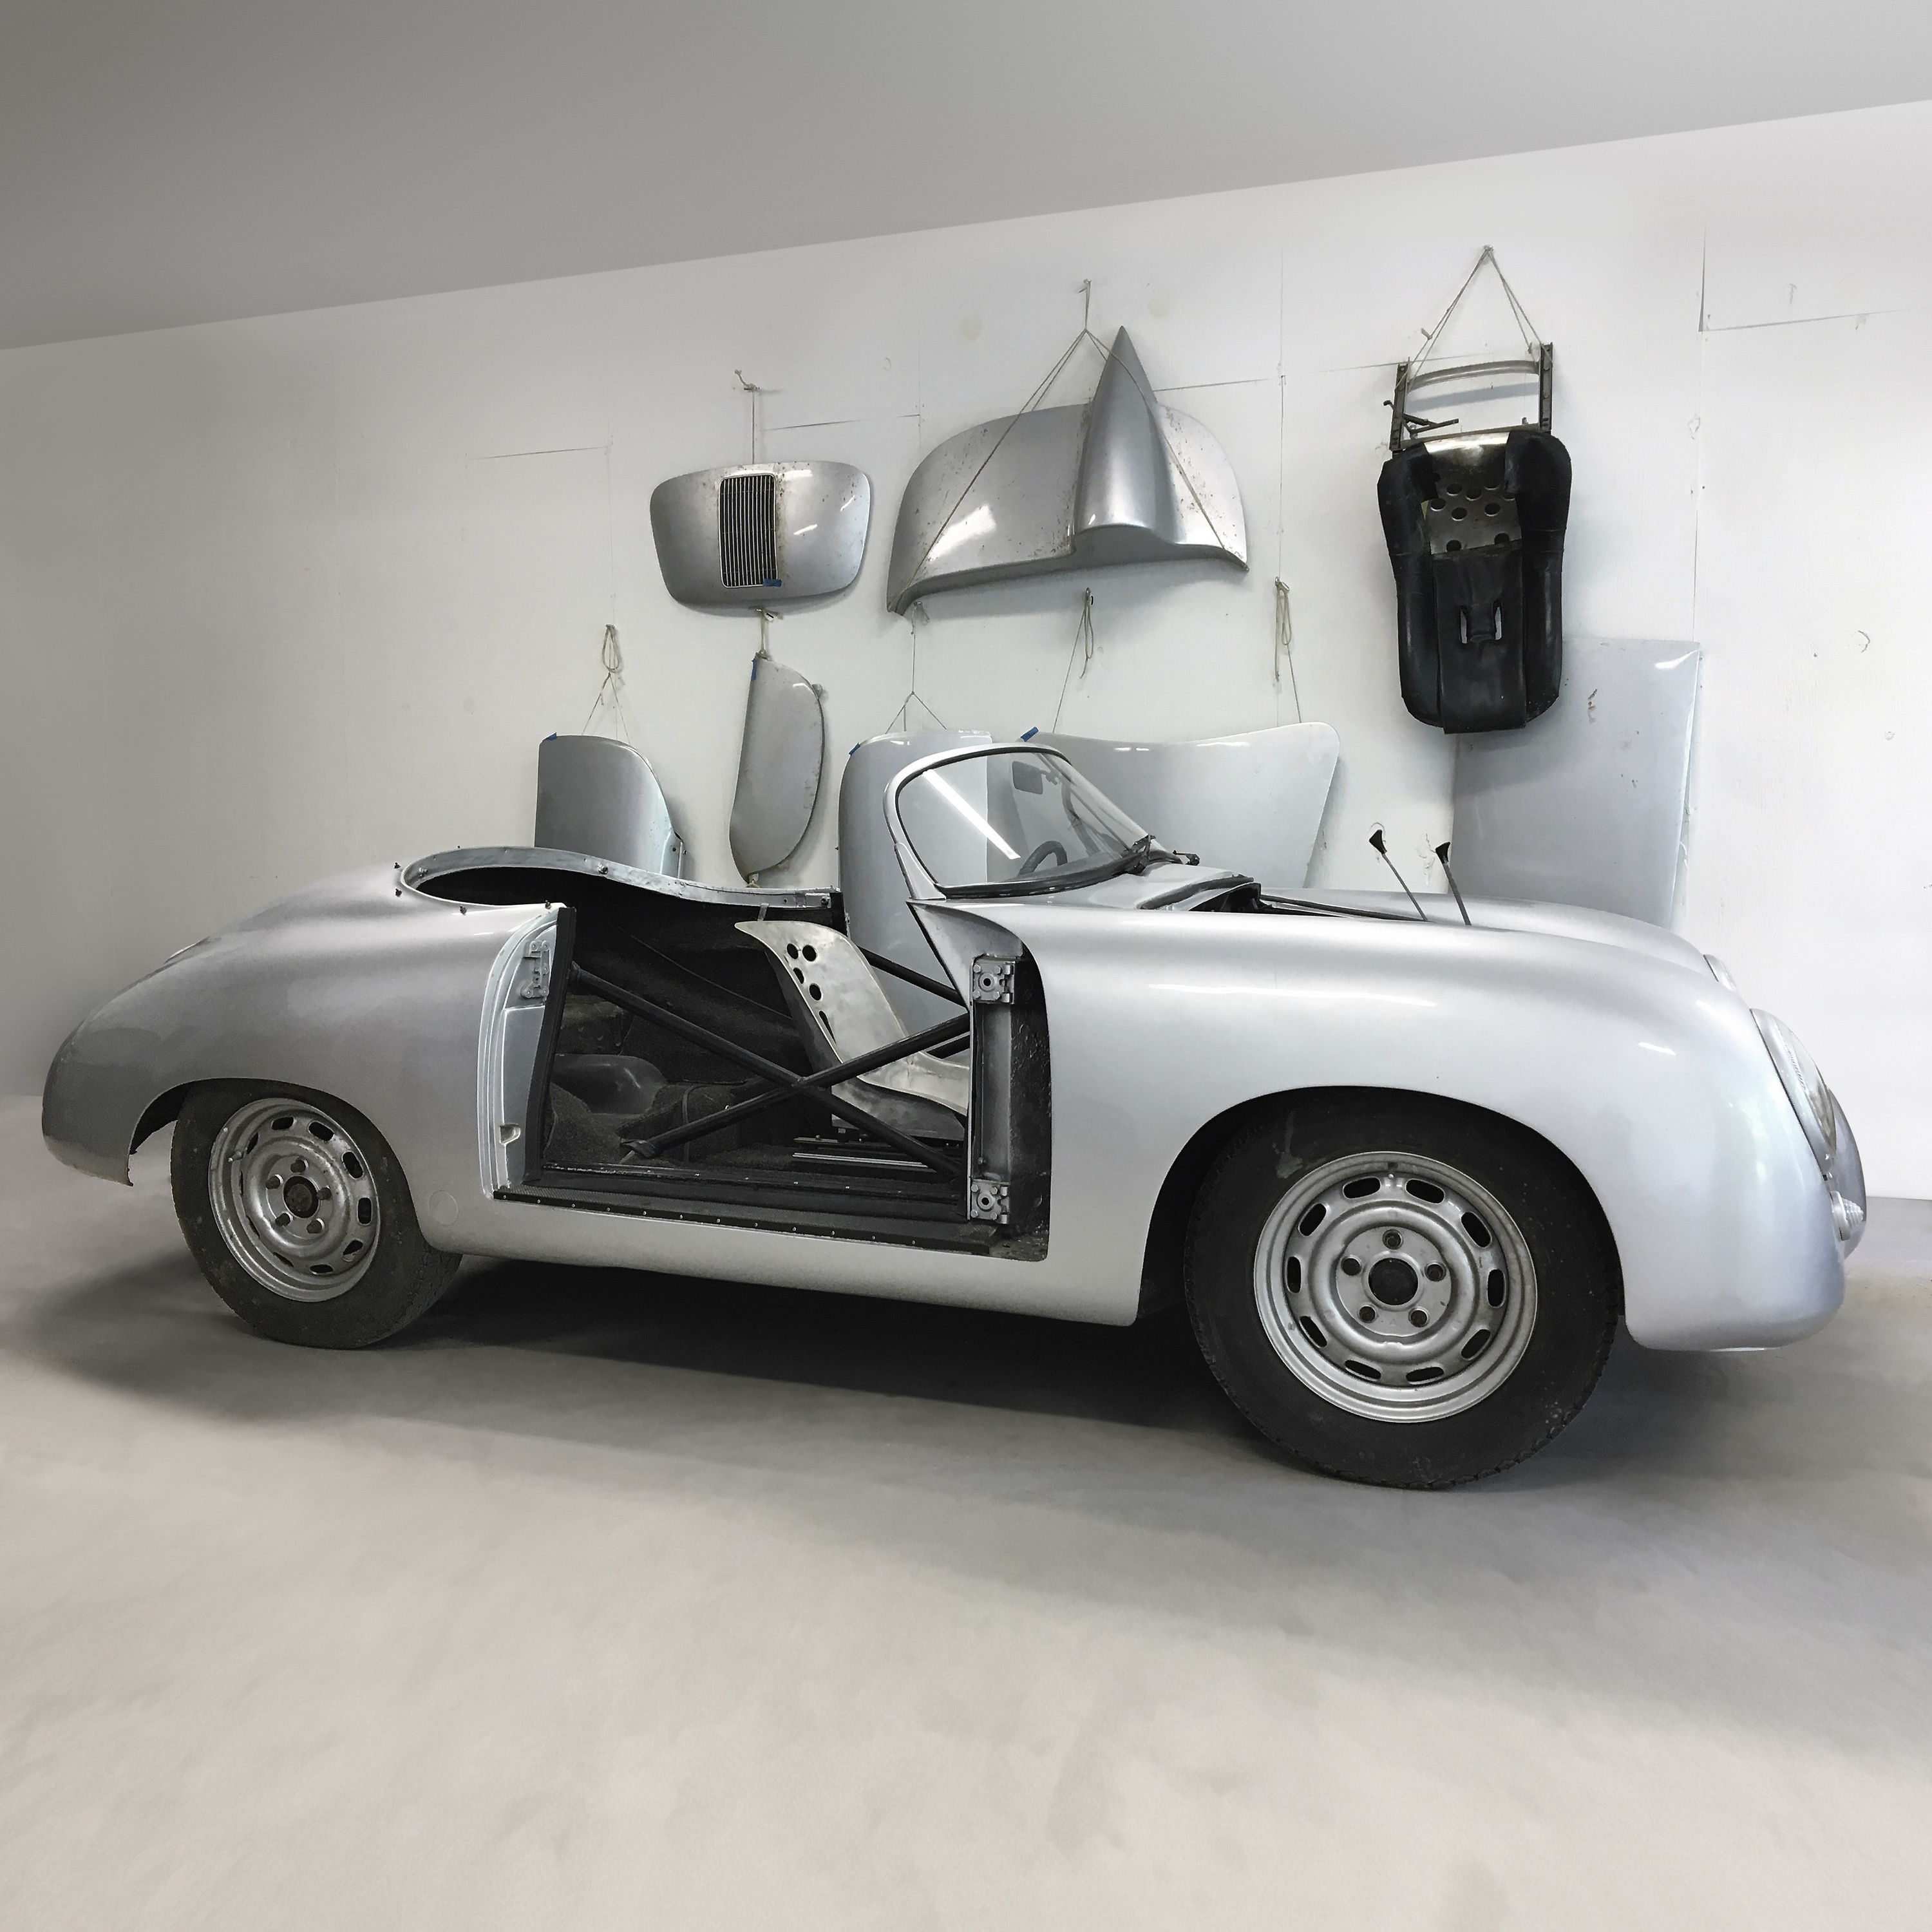 Robert Morris asked his assistant, Rolf Horst, to customize the Porsche 356 Speedster with an aluminum head fairing, passenger tonneau cover, alloy seat, and alloy rear wheel spats. Image courtesy of Rago/Wright/LAMA